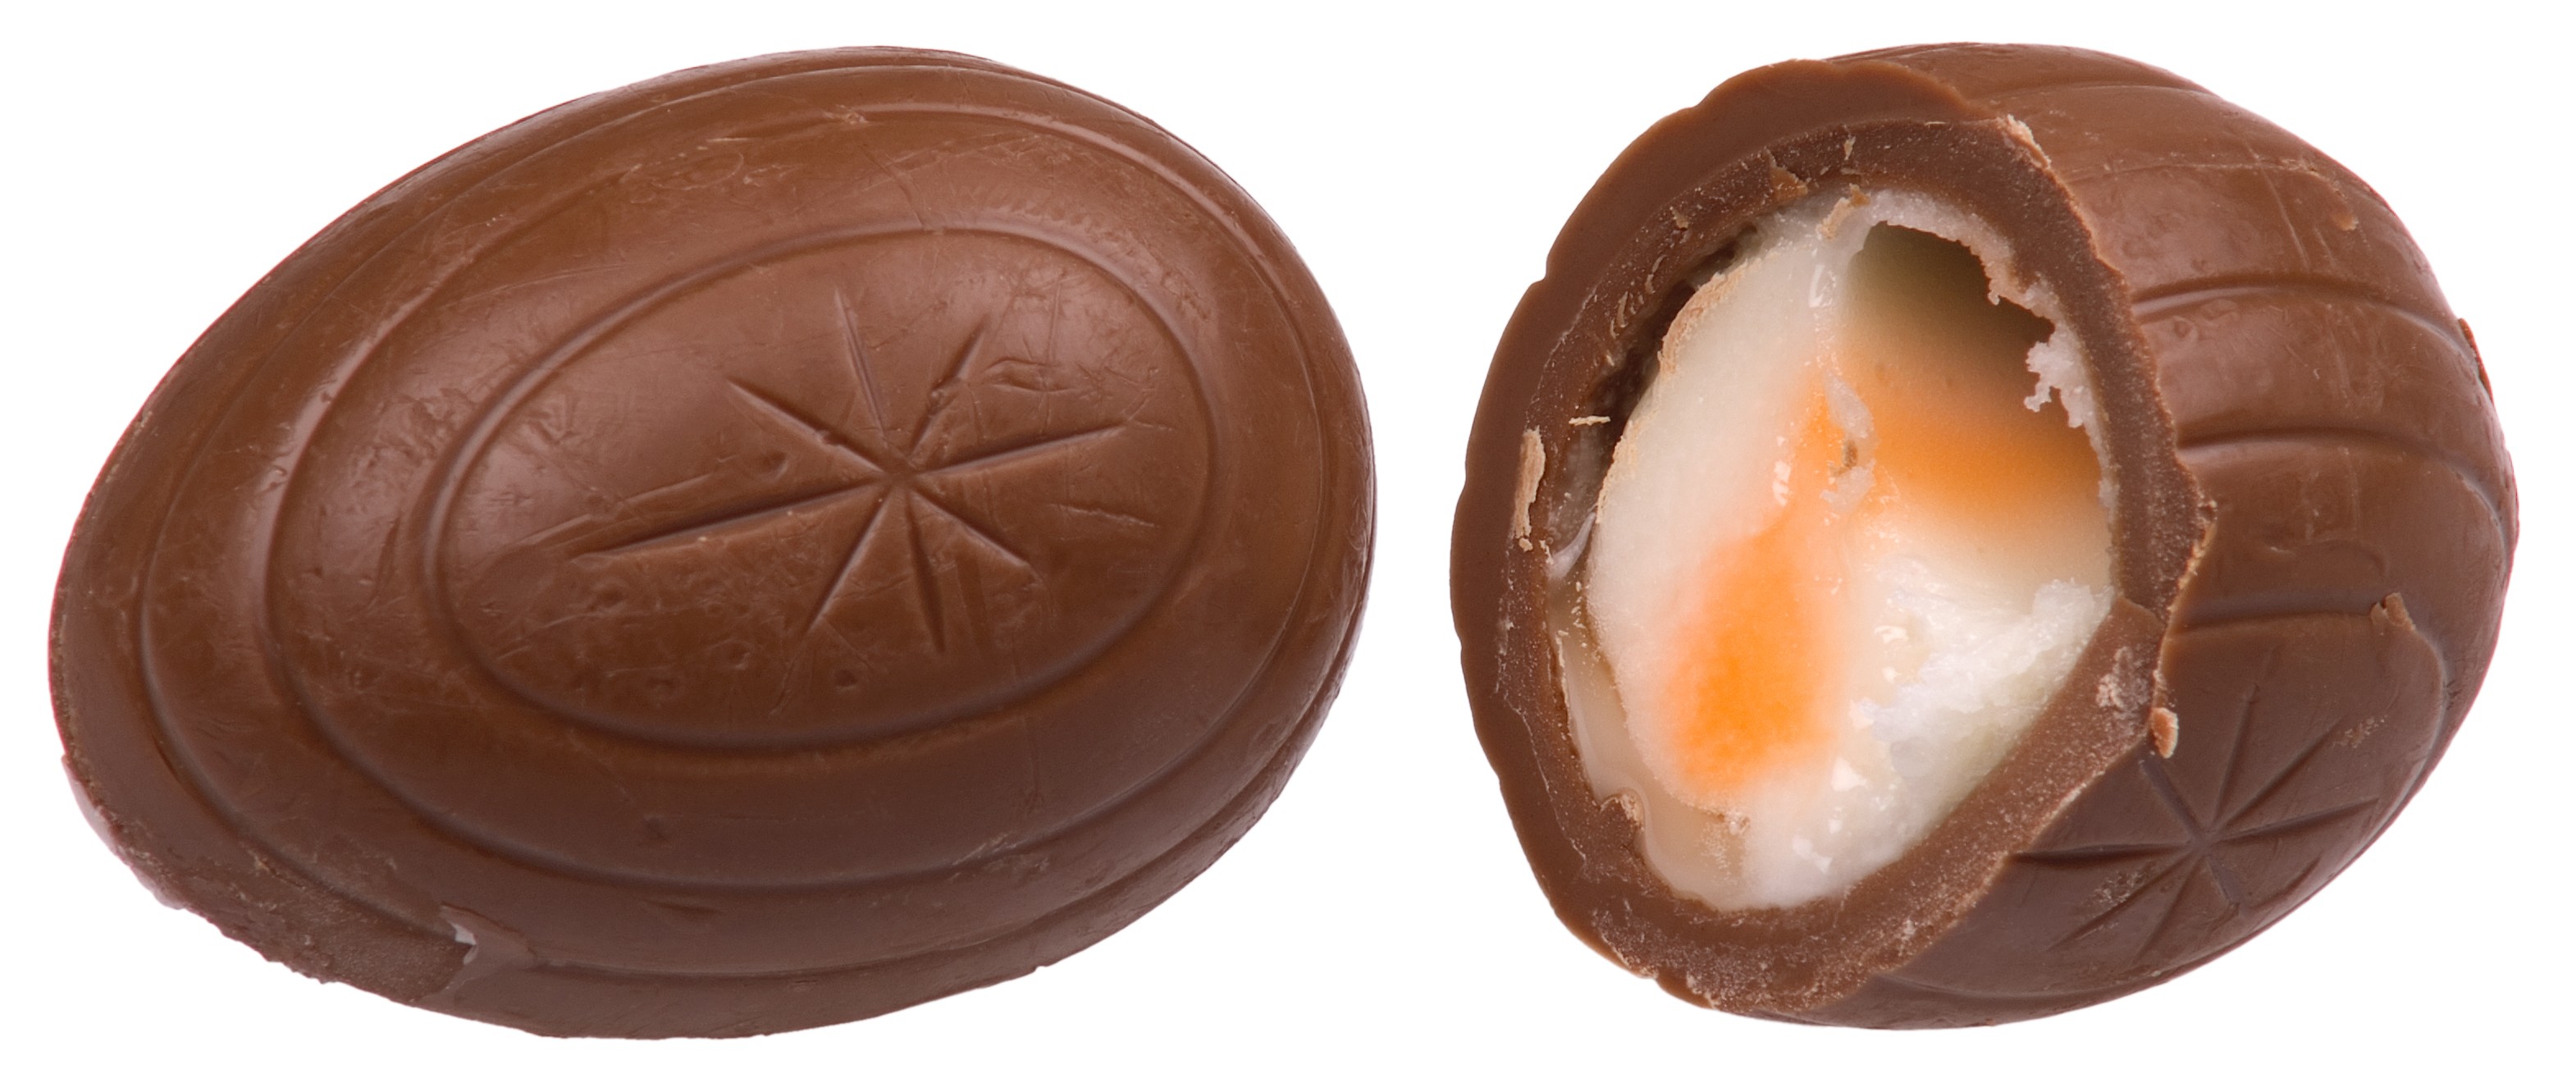 The great global Cadbury Creme Egg controversy